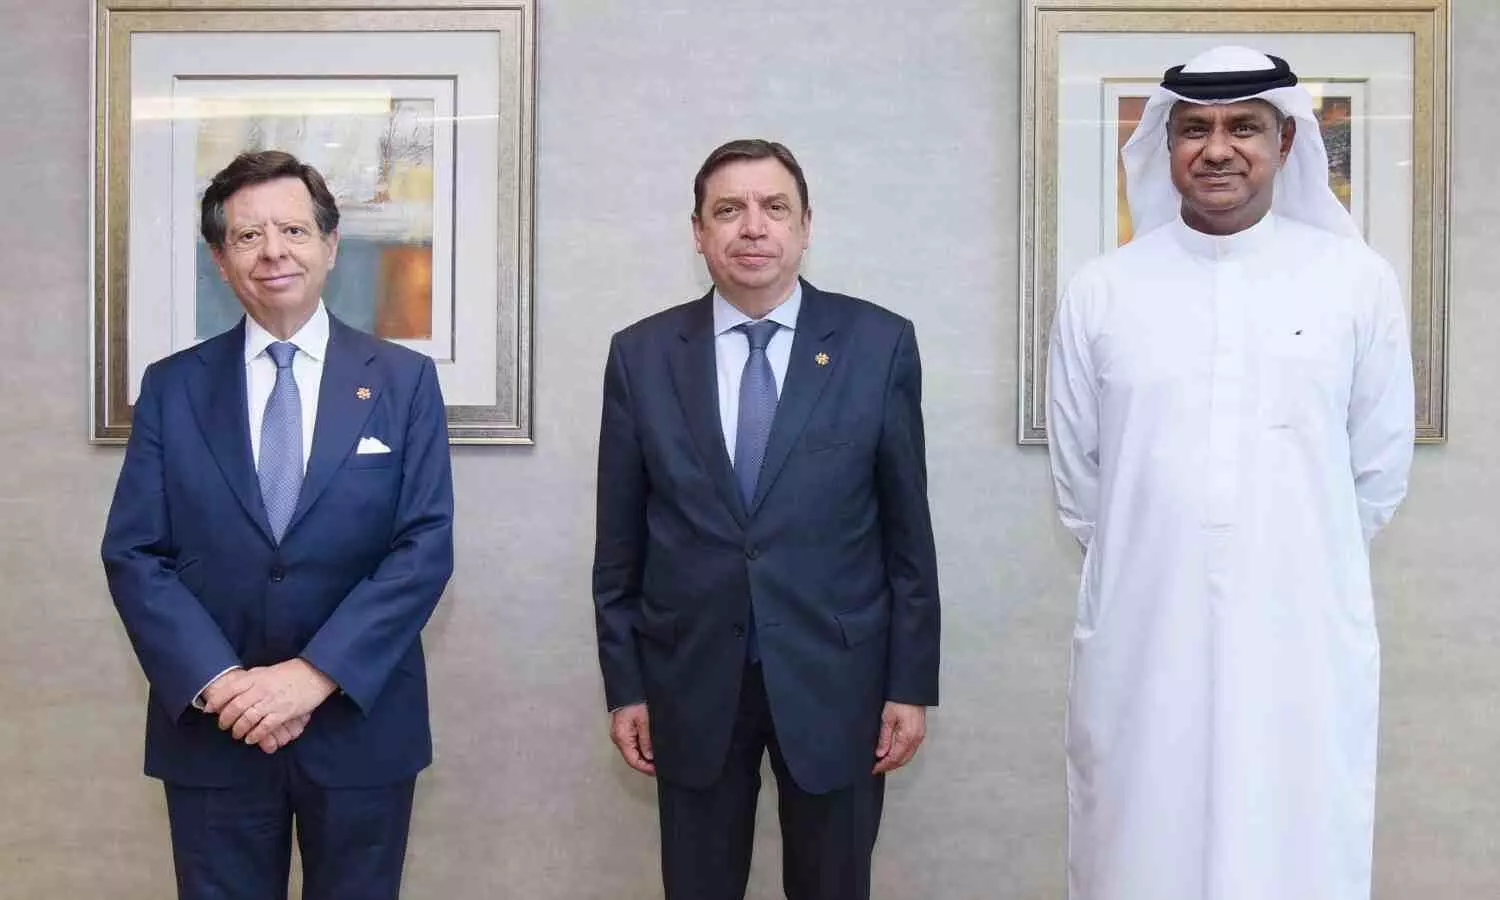 Emirates SkyCargo welcomes ministerial delegation from Spain